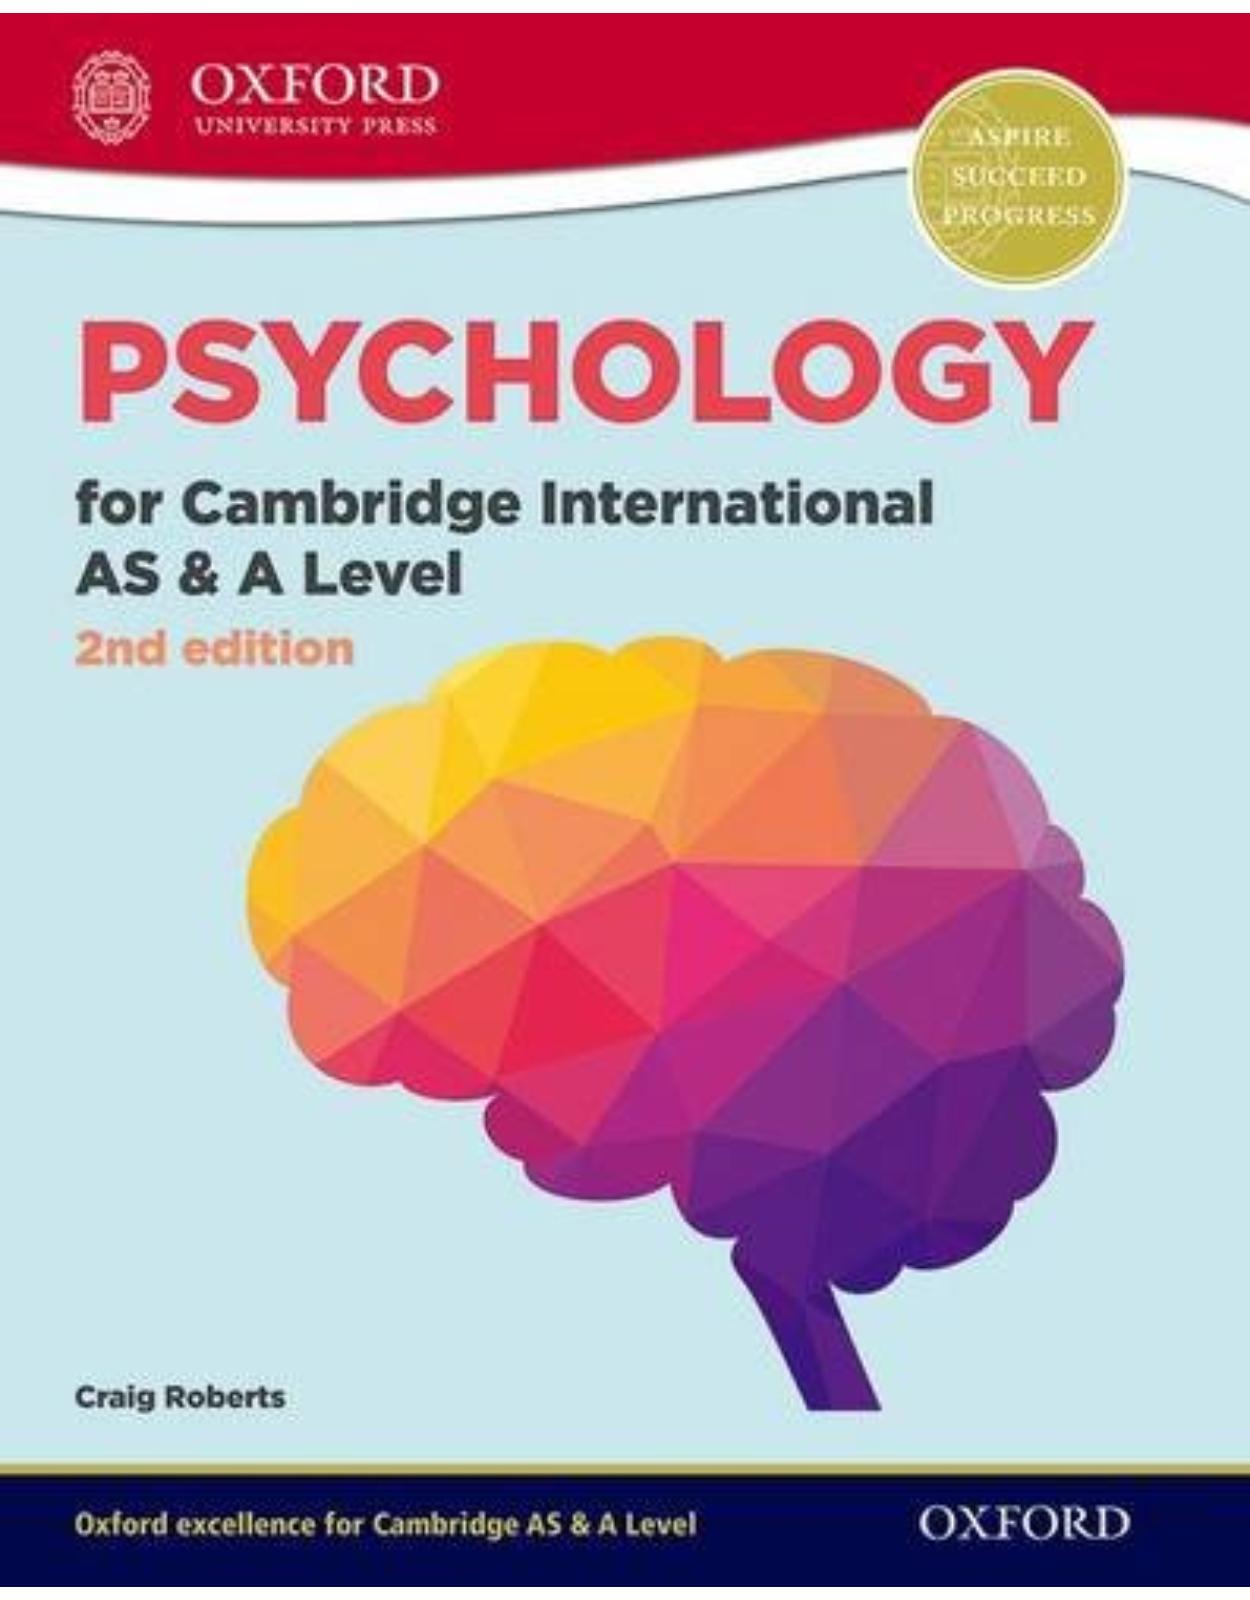 Psychology for Cambridge International AS and A Level (9990 syllabus)